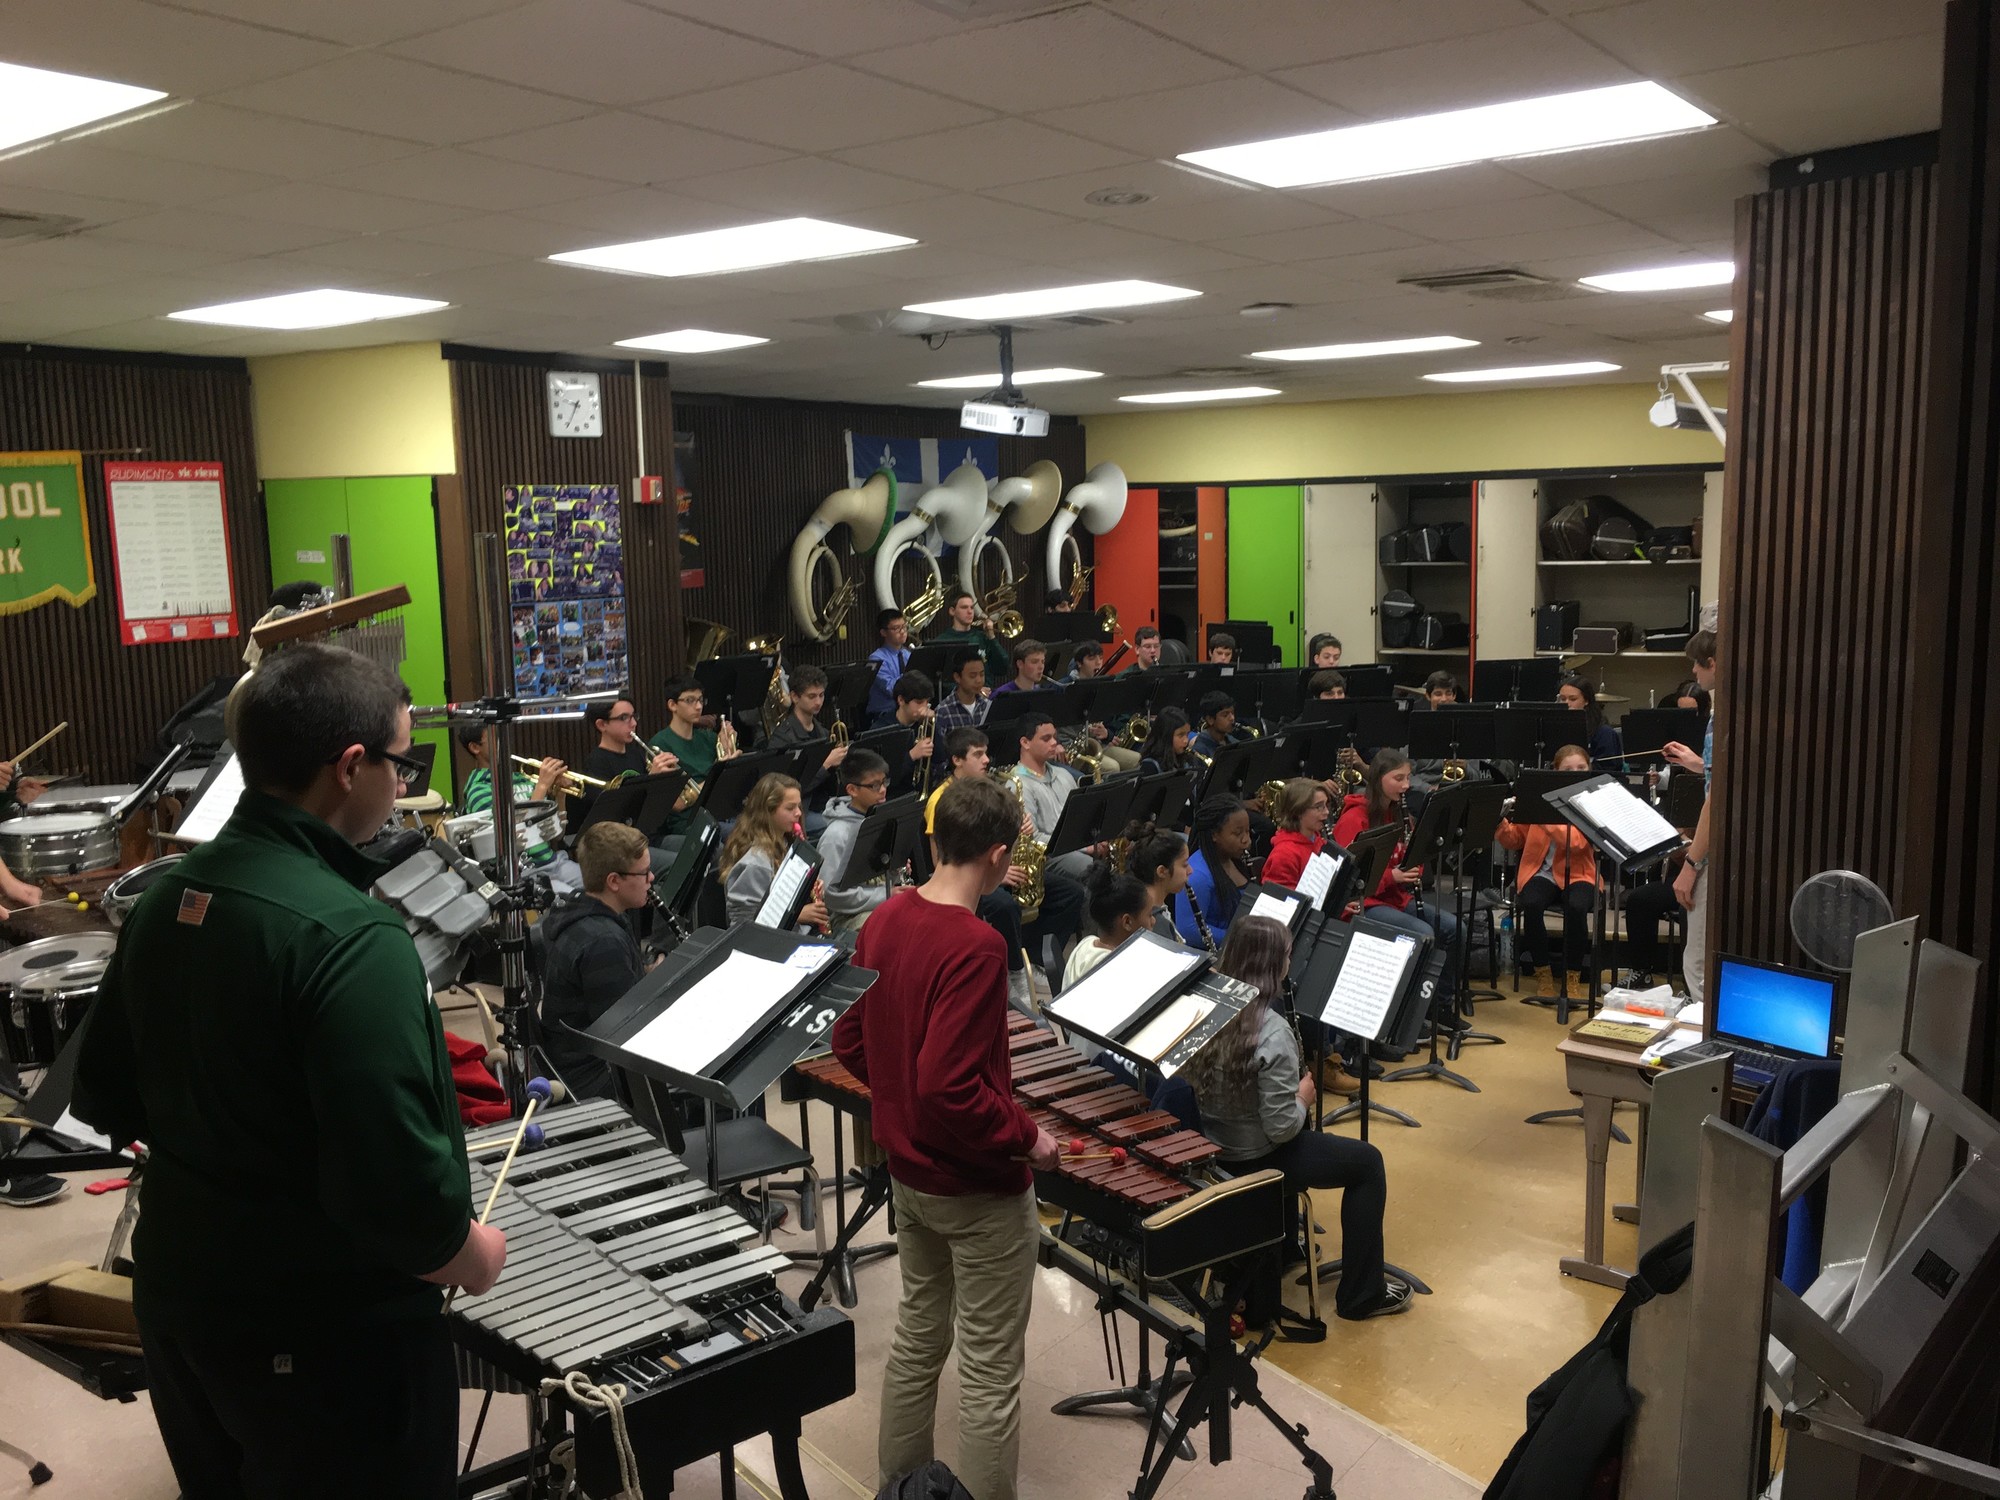 There is currently one band room at Lynbrook High School, and the orchestra and chorus programs share the auditorium space.